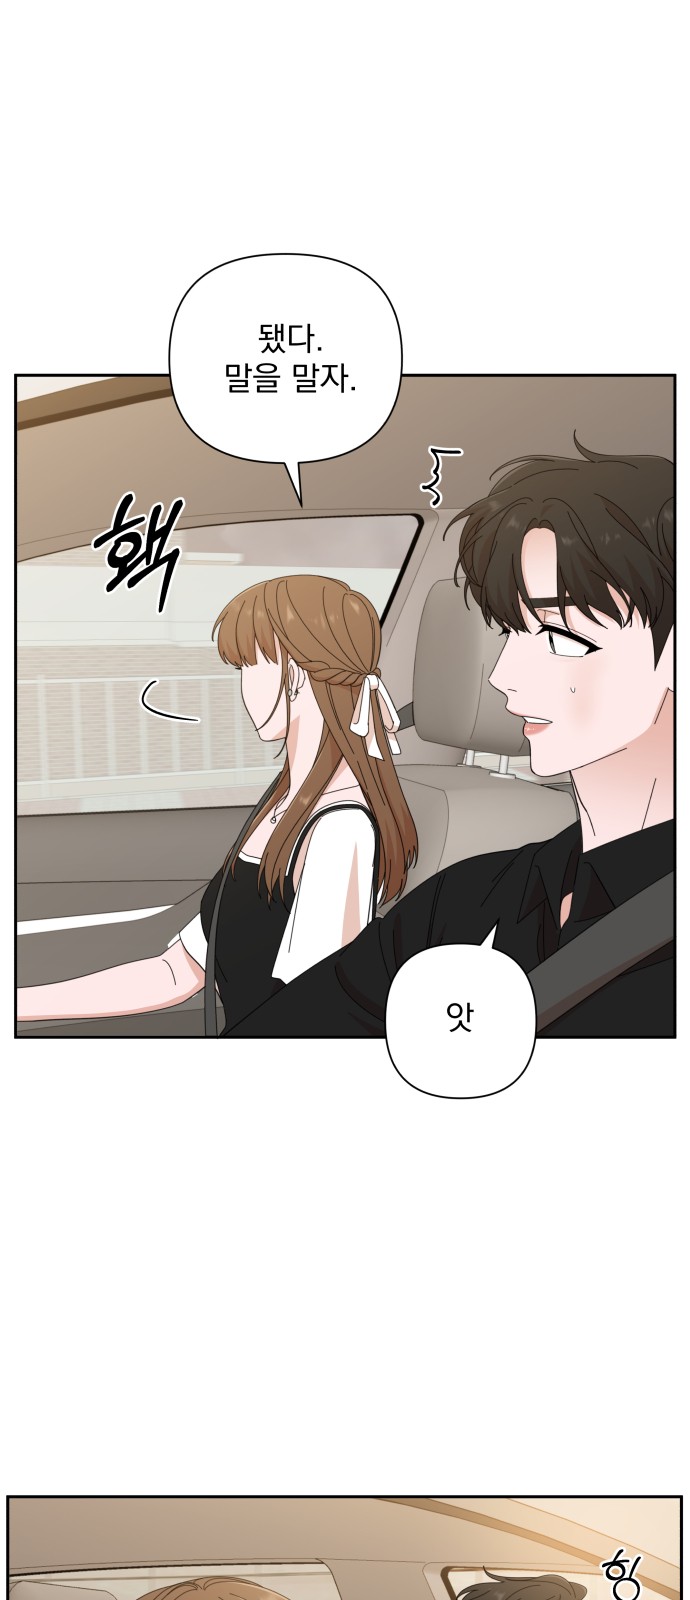 The Man With Pretty Lips - Chapter 37 - Page 4